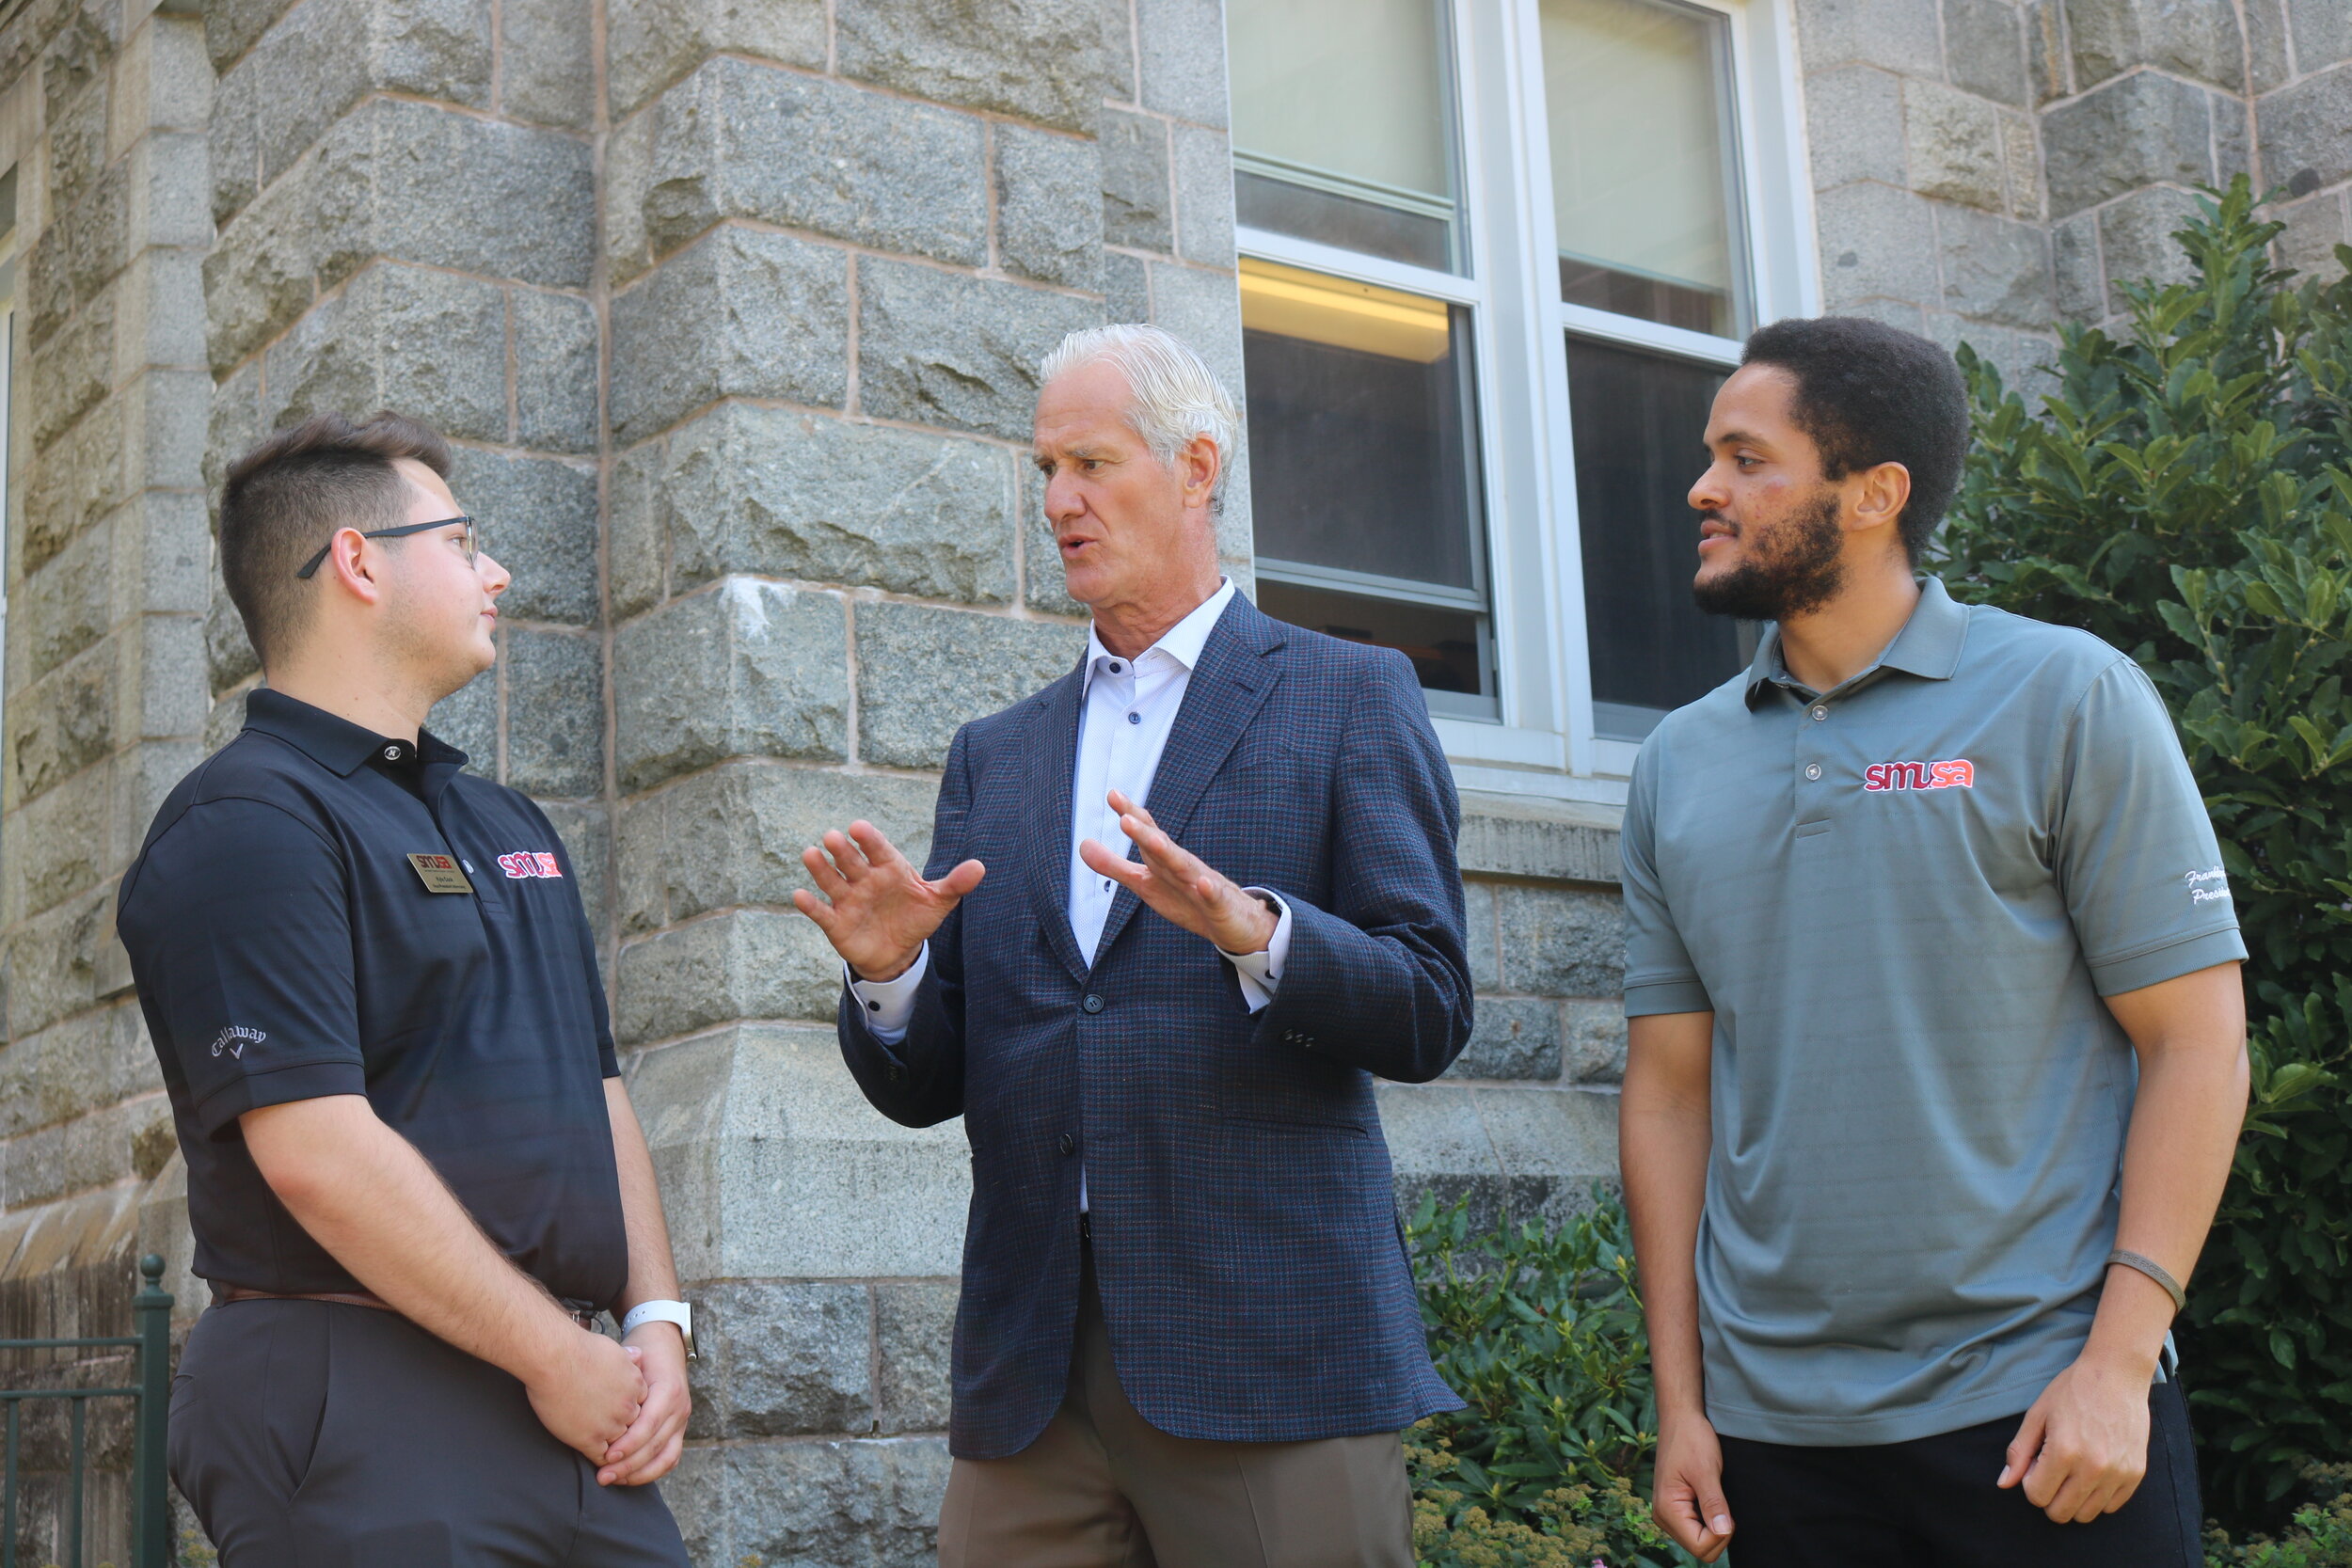 Scott chatting with SMUSA VP Advocacy Kyle Cook and SMUSA President and CEO Franklyn Southwell